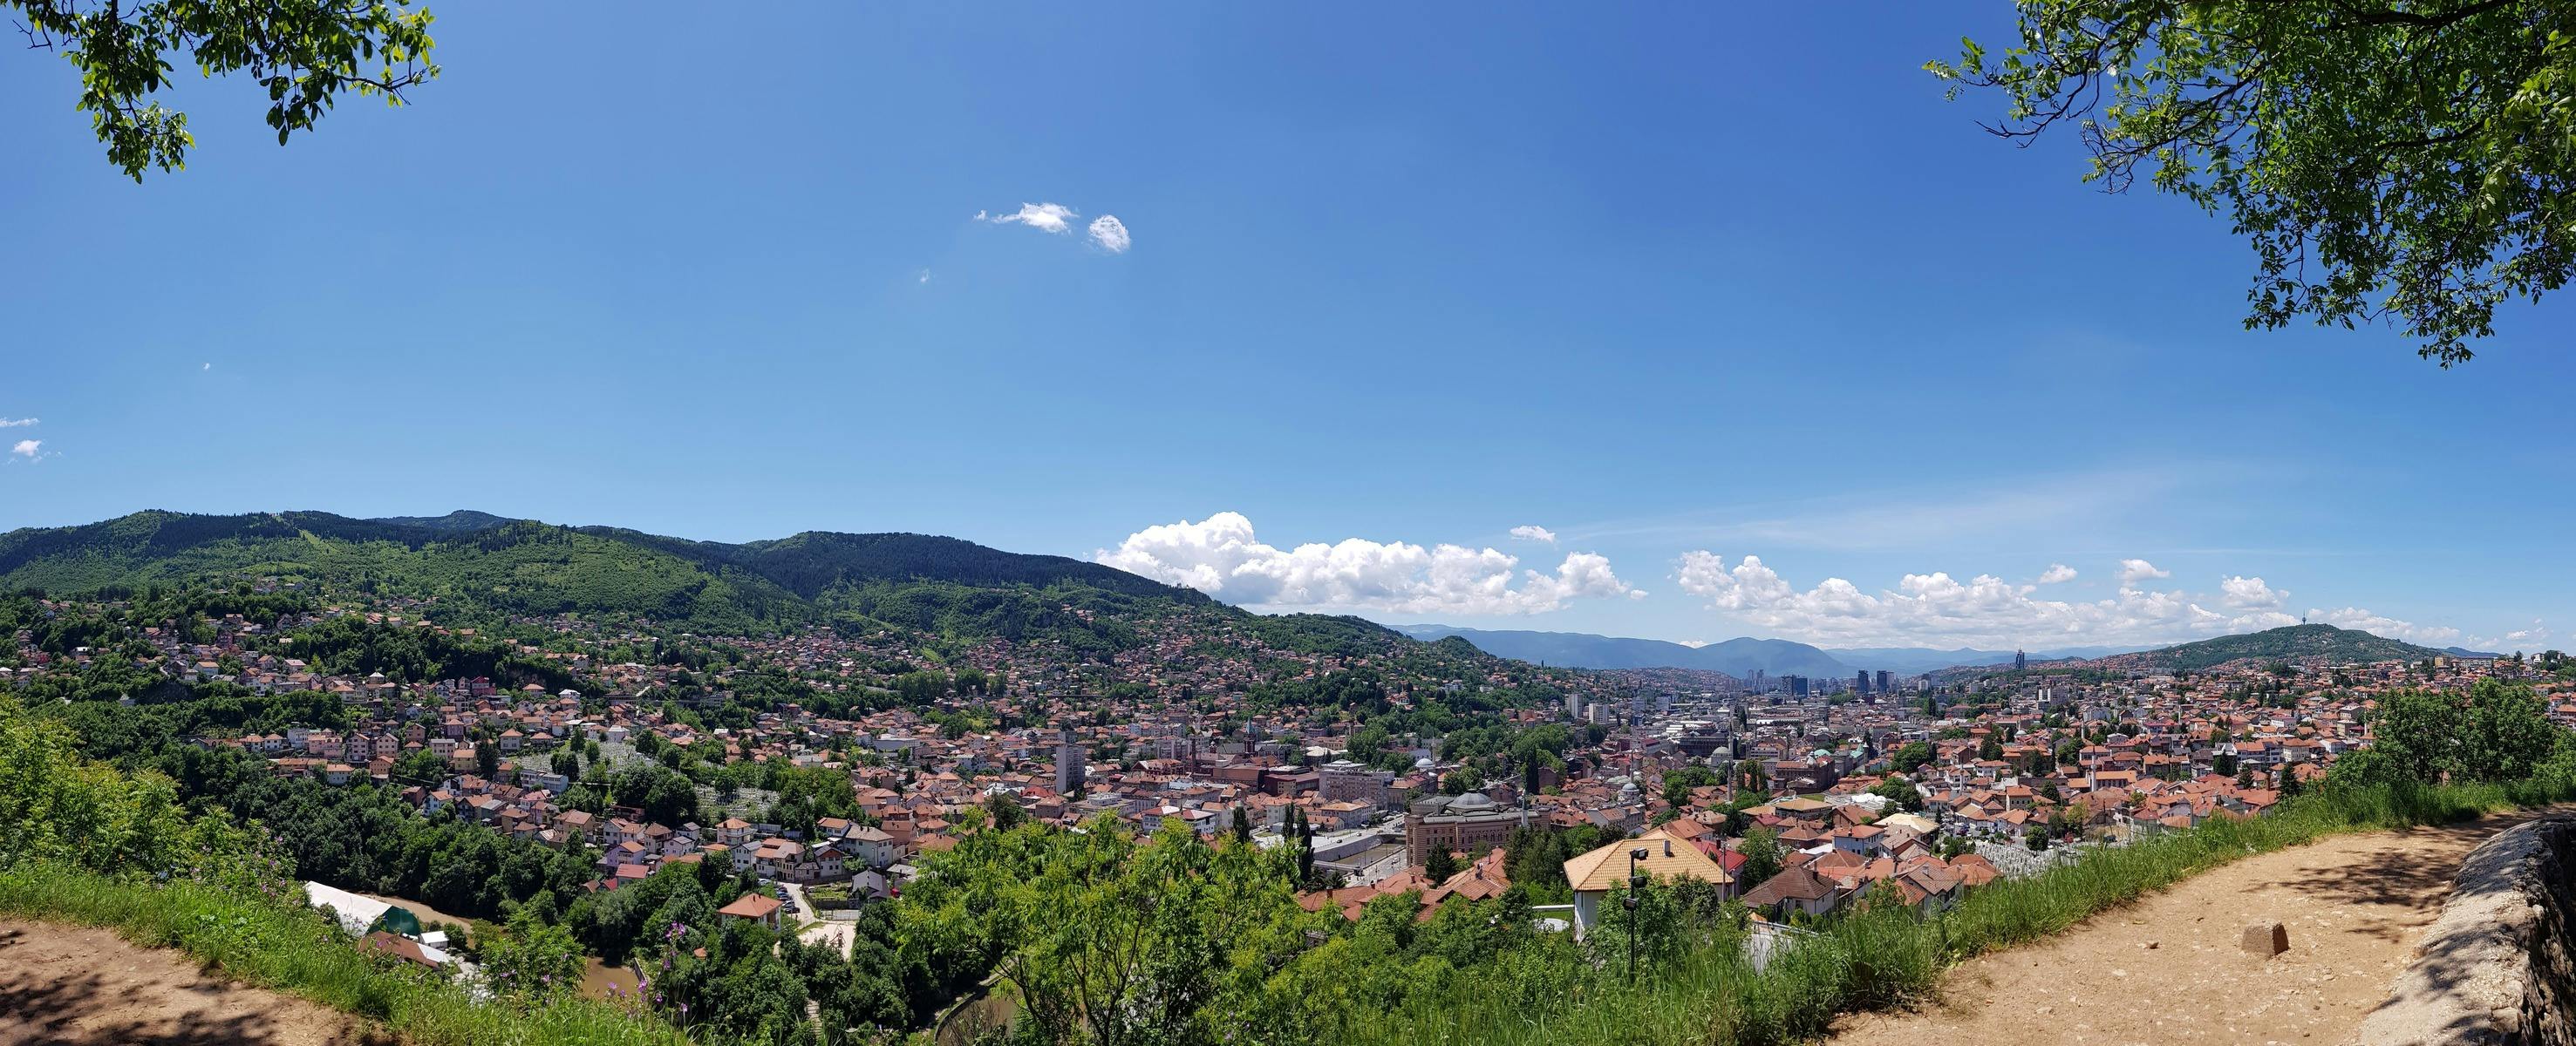 Guided tour through the old town in Sarajevo